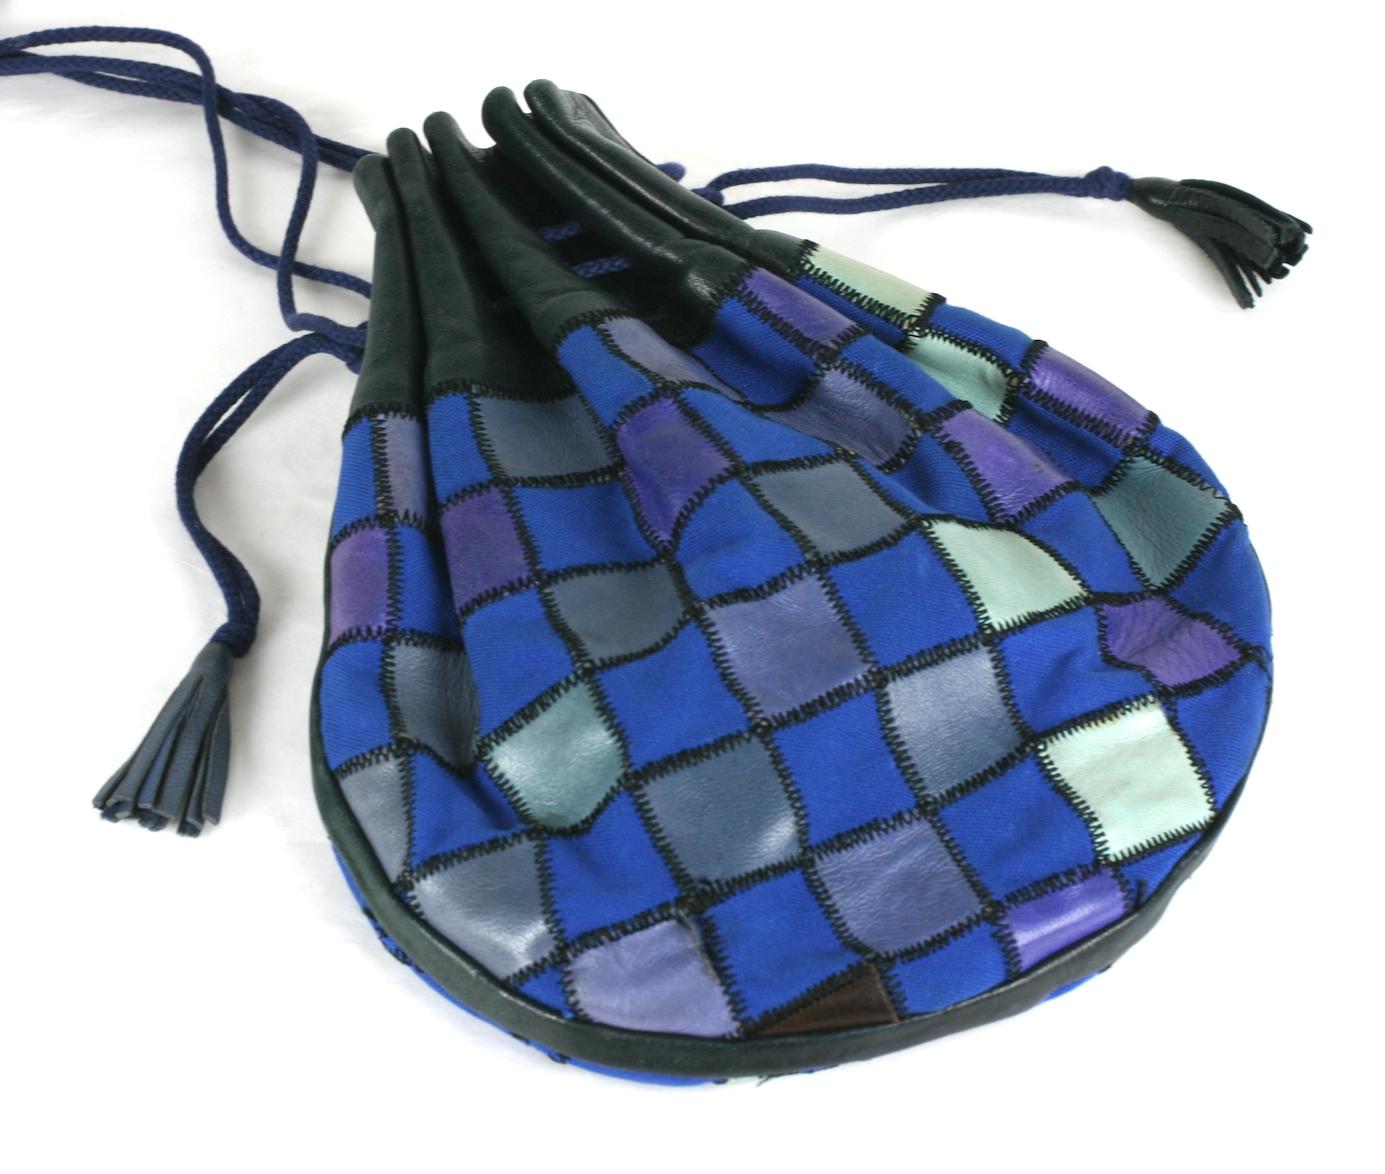 Rare, early Yves Saint Laurent  spring summer 1980 Flat drawstring pouch of patch worked leather and canvas. Multicolored patchwork canvas in royal blue with purple, grey and green-blue leather with black topstitching. Long black leather straps with